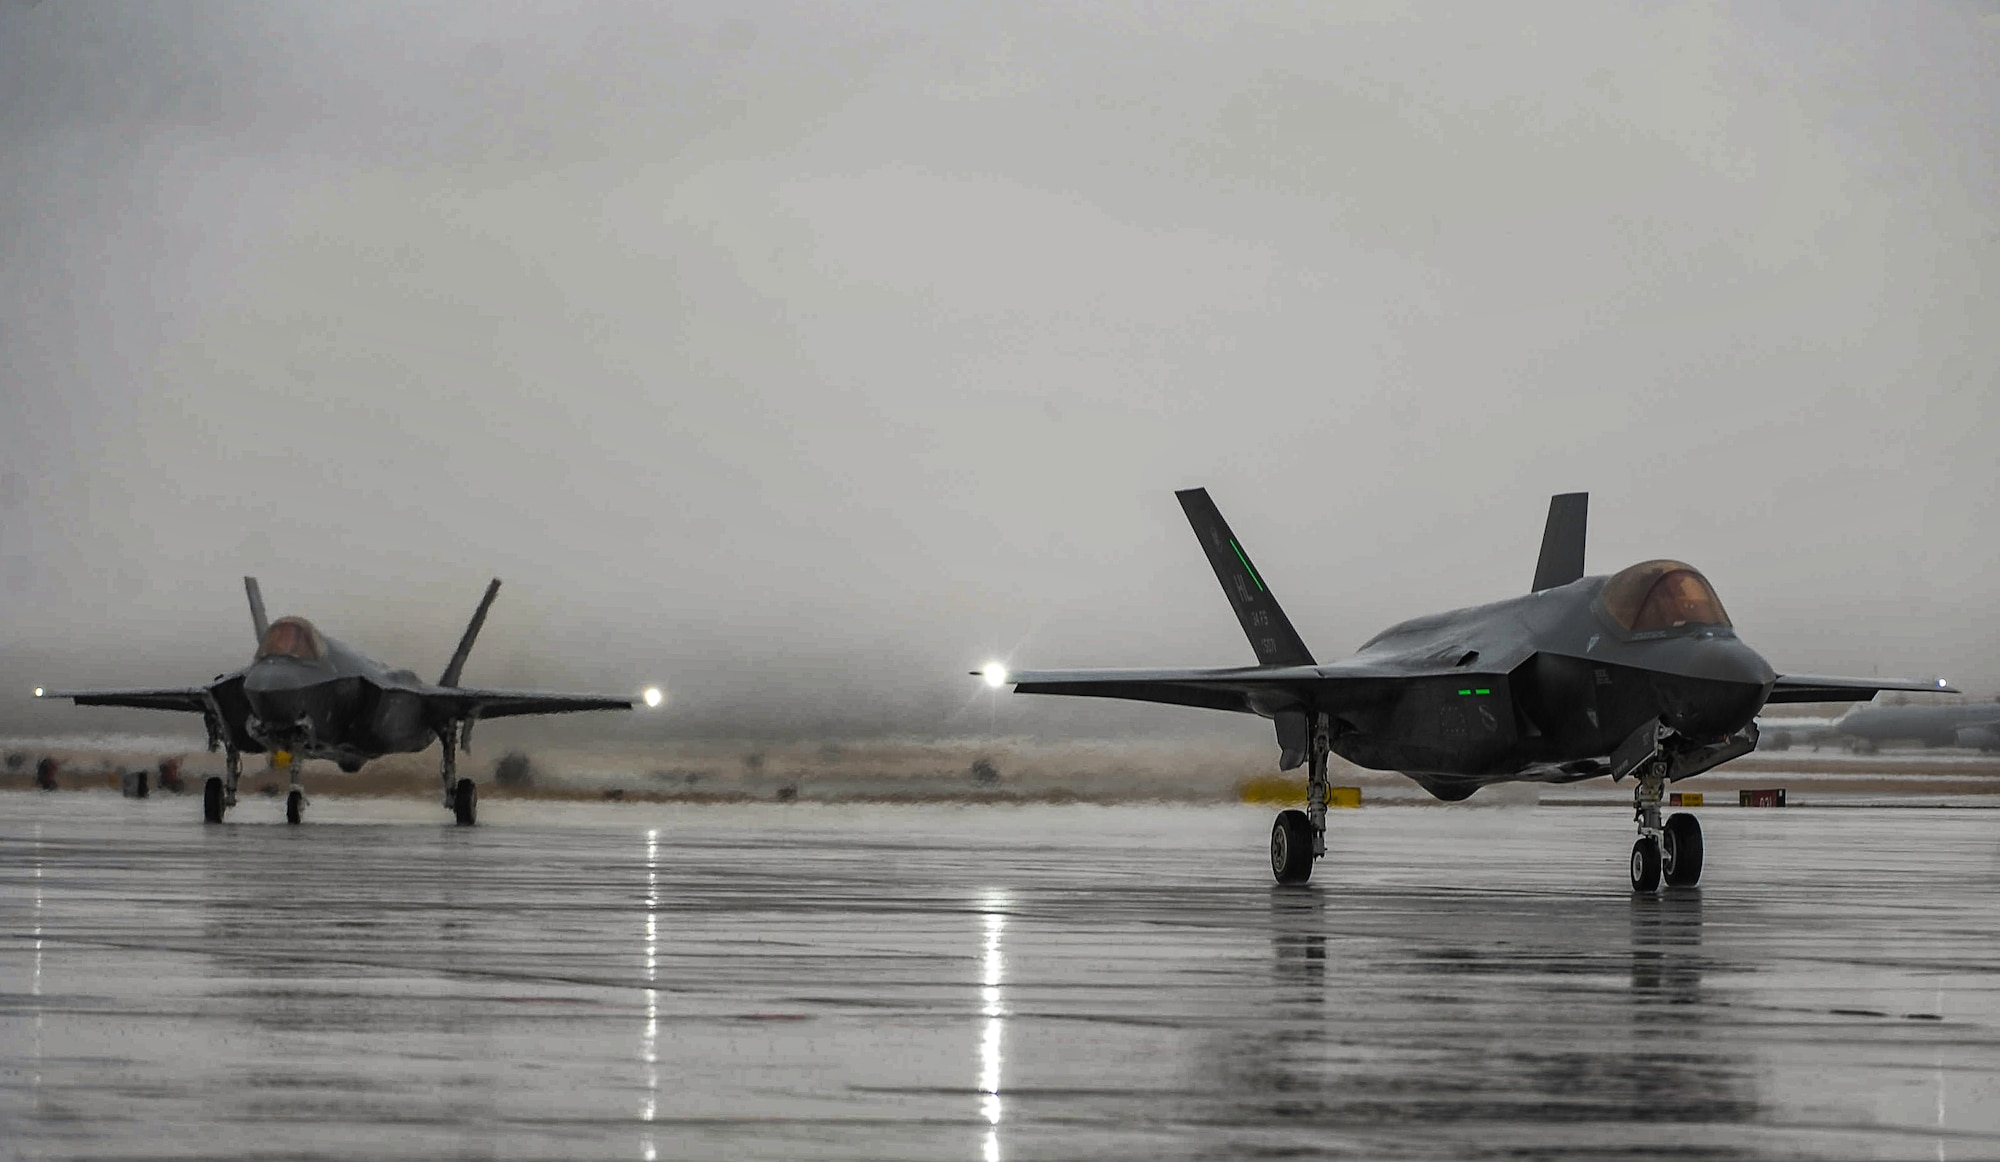 Two F-35A Lightning IIs assigned to Hill Air Force Base, Utah, taxi after landing at Nellis Air Force Base, Nev., to participate in Red Flag 17-1, Jan. 21, 2017. Red Flag is a realistic combat exercise involving U.S. and allied air forces conducting training operation on the 15,000 square mile Nevada Test and Training Range. (U.S. Air Force photo by Airman 1st Class Kevin Tanenbaum/Released)